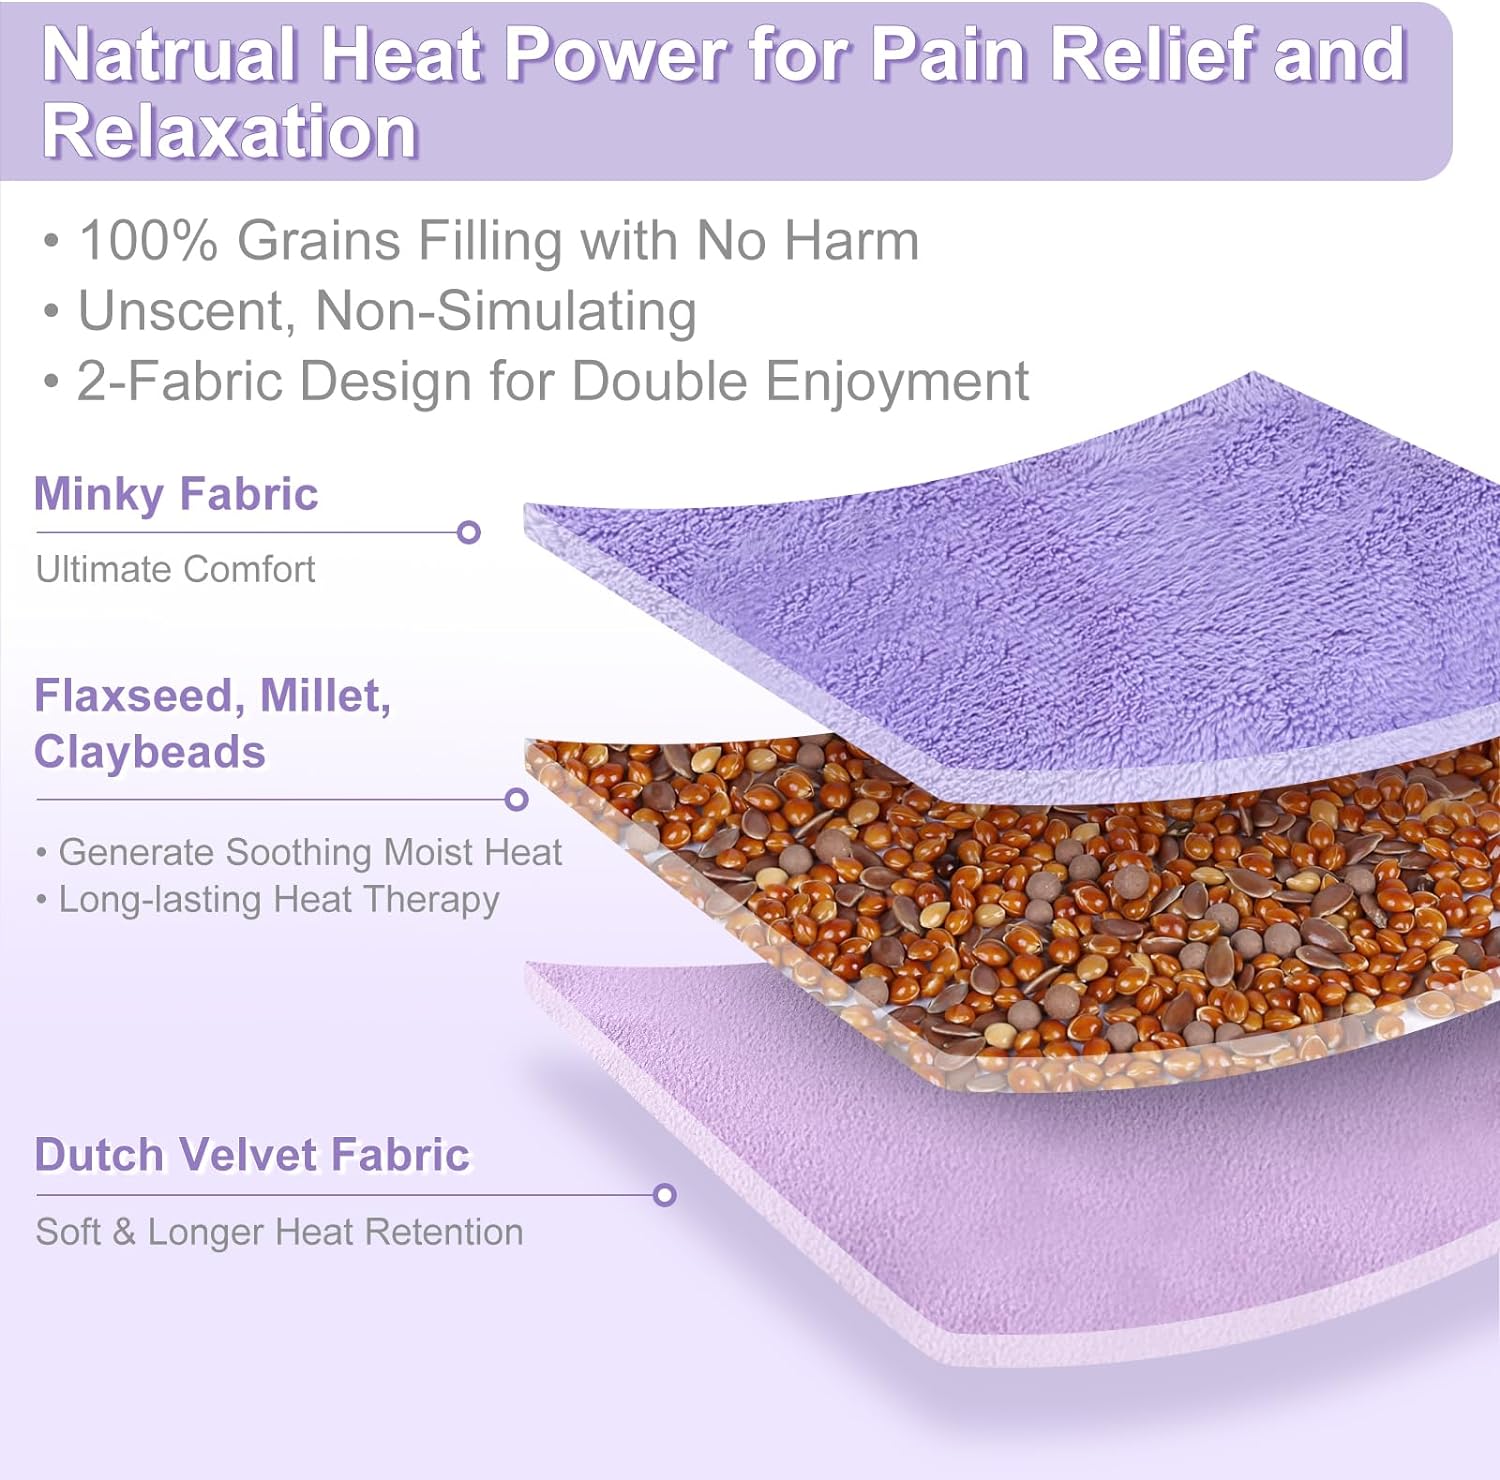 Remarks on SuzziPad Microwave Heating Pad for Pain Relief, Purple